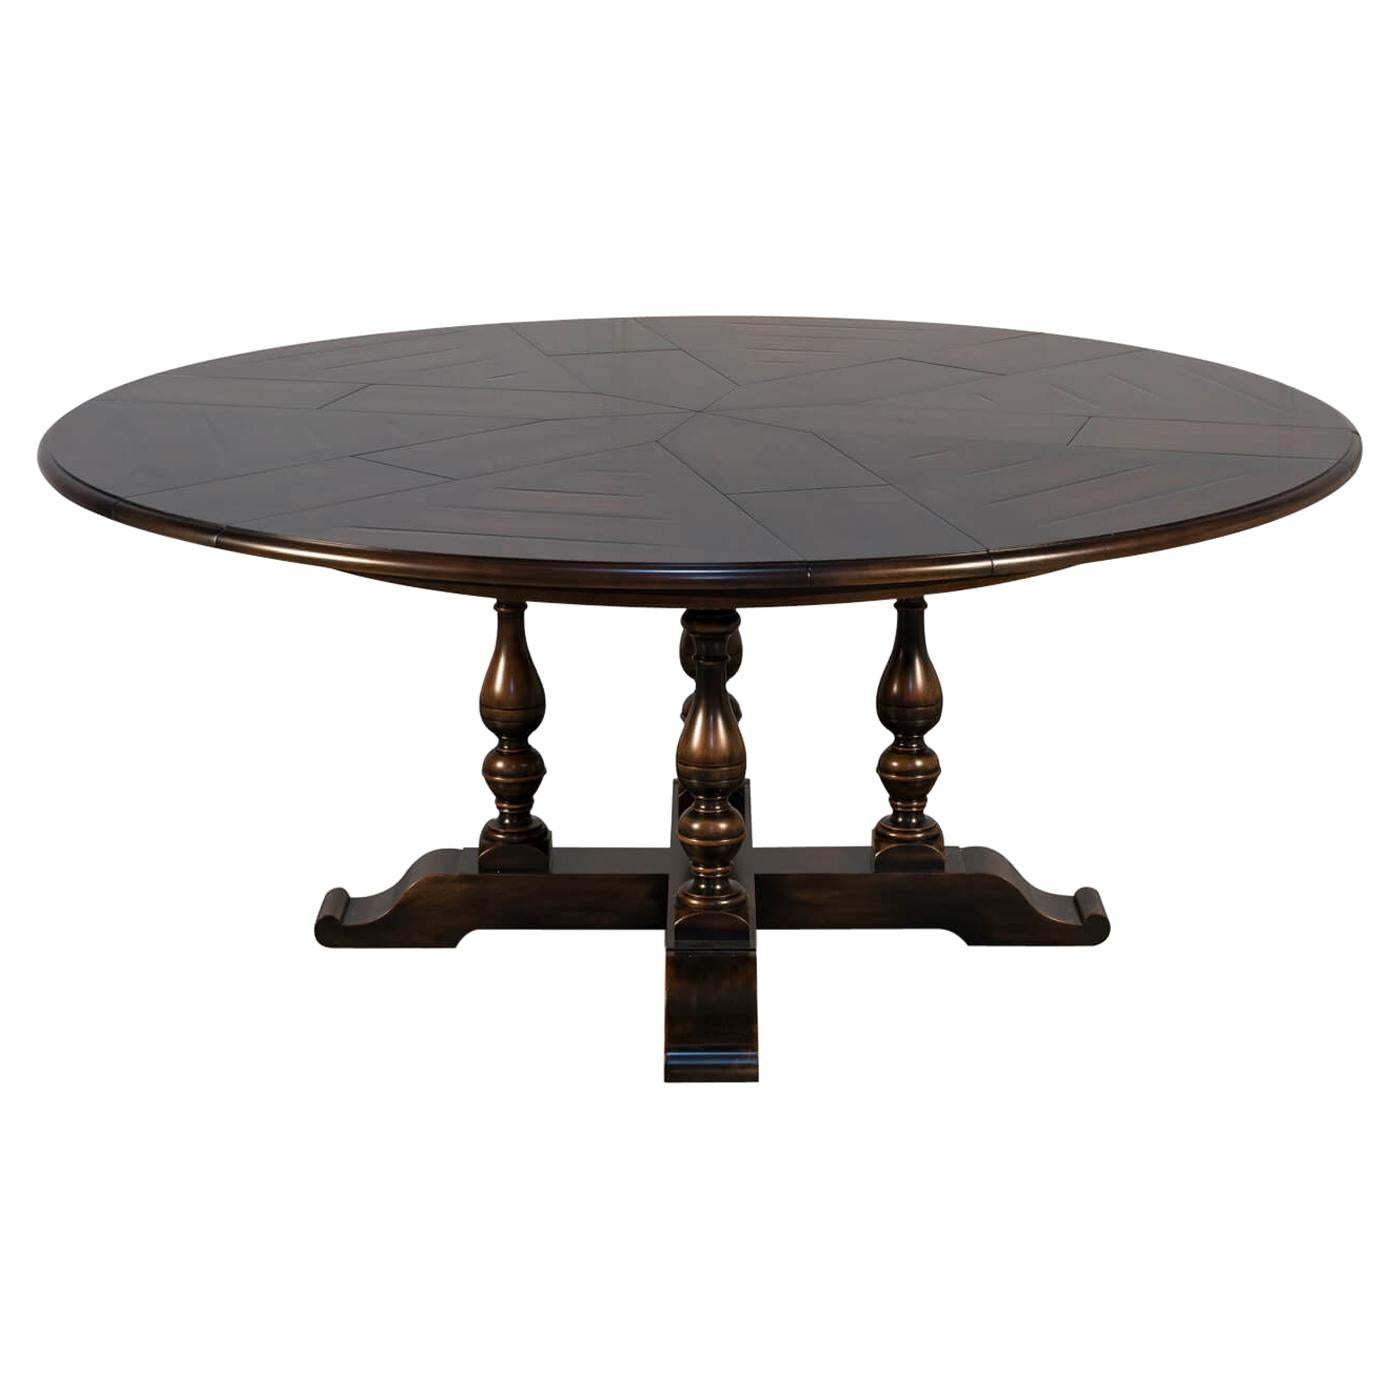 English Style Round Extension Dining Table, Ebony Finish For Sale